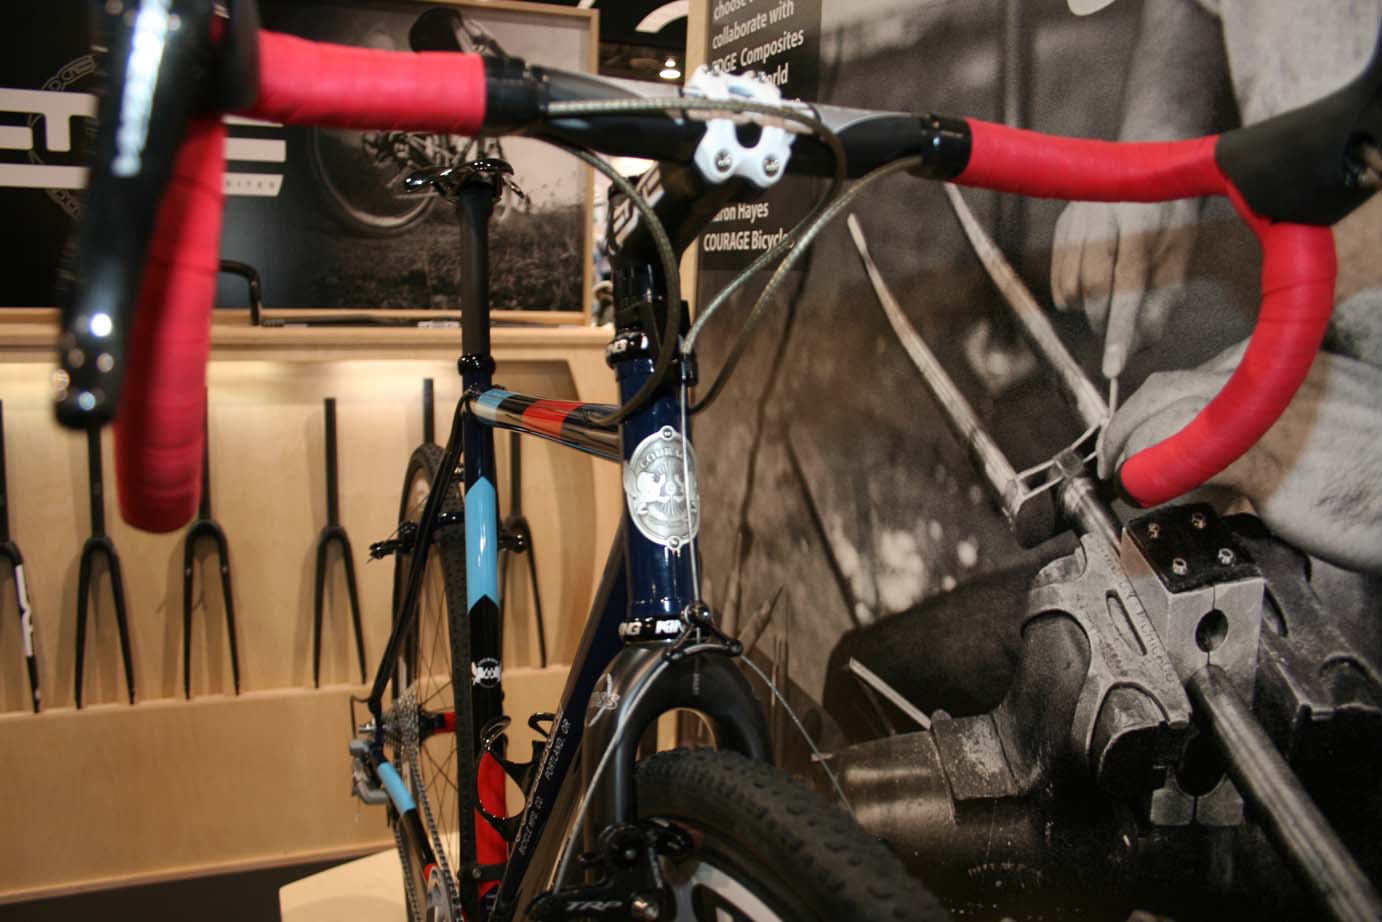 The growing composites company offers a wide selection of parts for  cyclocross racers, and Planet Bike pro Jonathan Page rides the bar, stem and wheels. ?Cyclocross Magazine